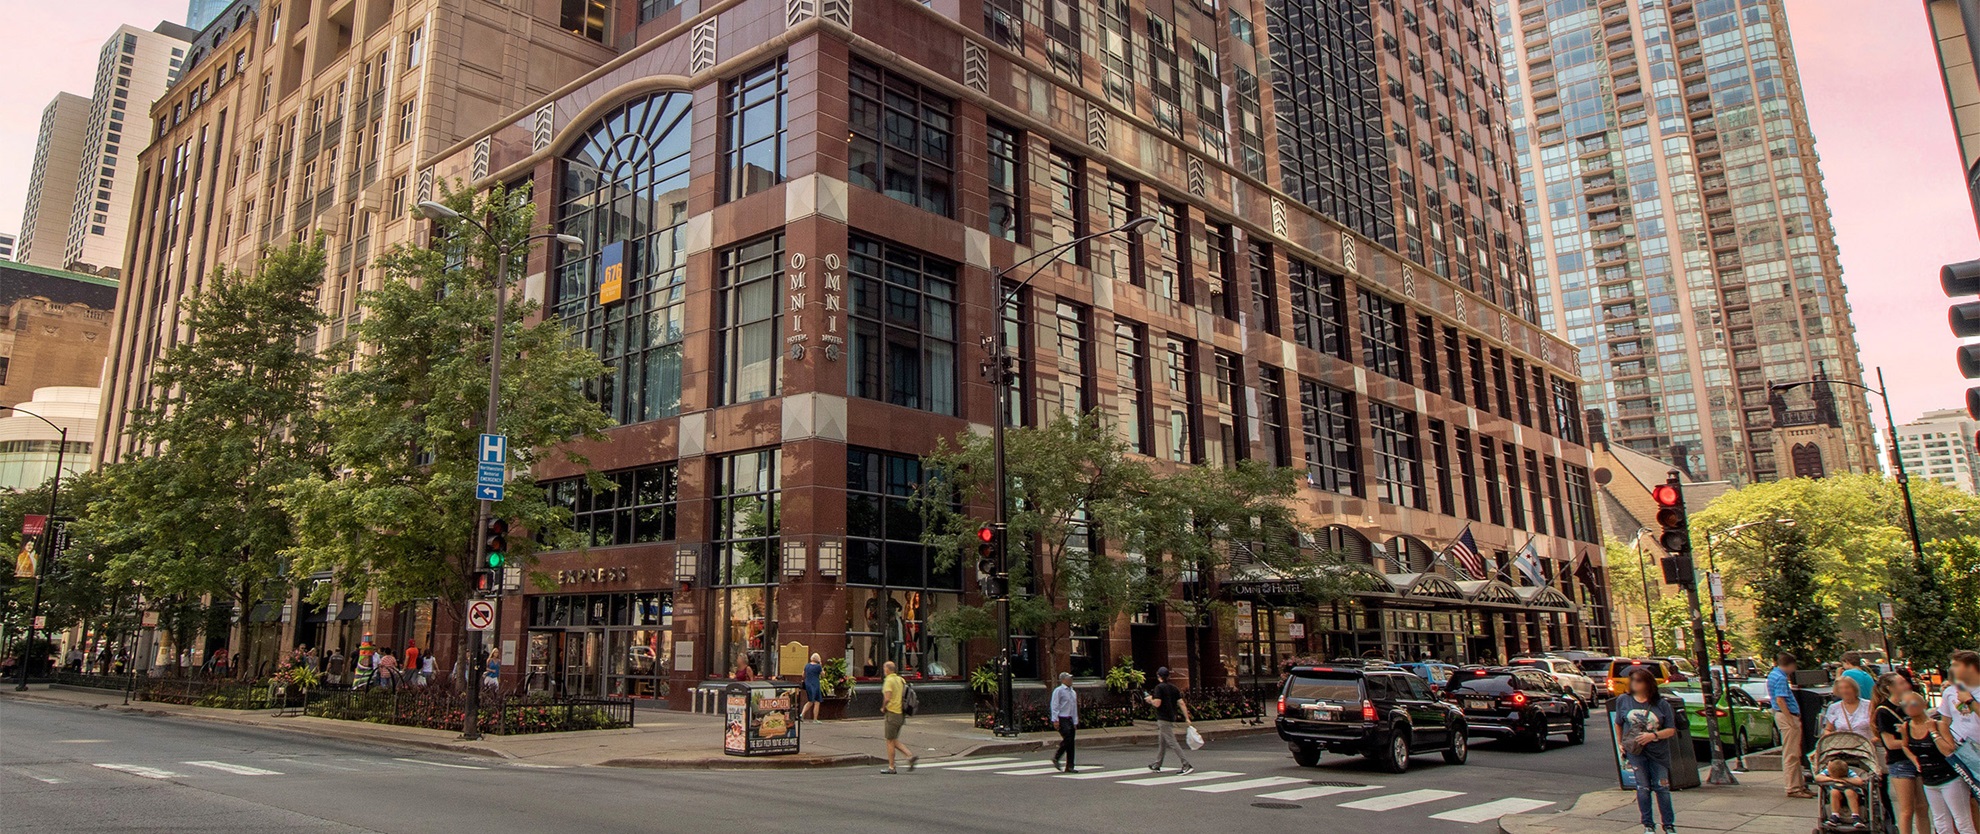 20 N Michigan Ave, Chicago, IL 60602 - Retail for Lease